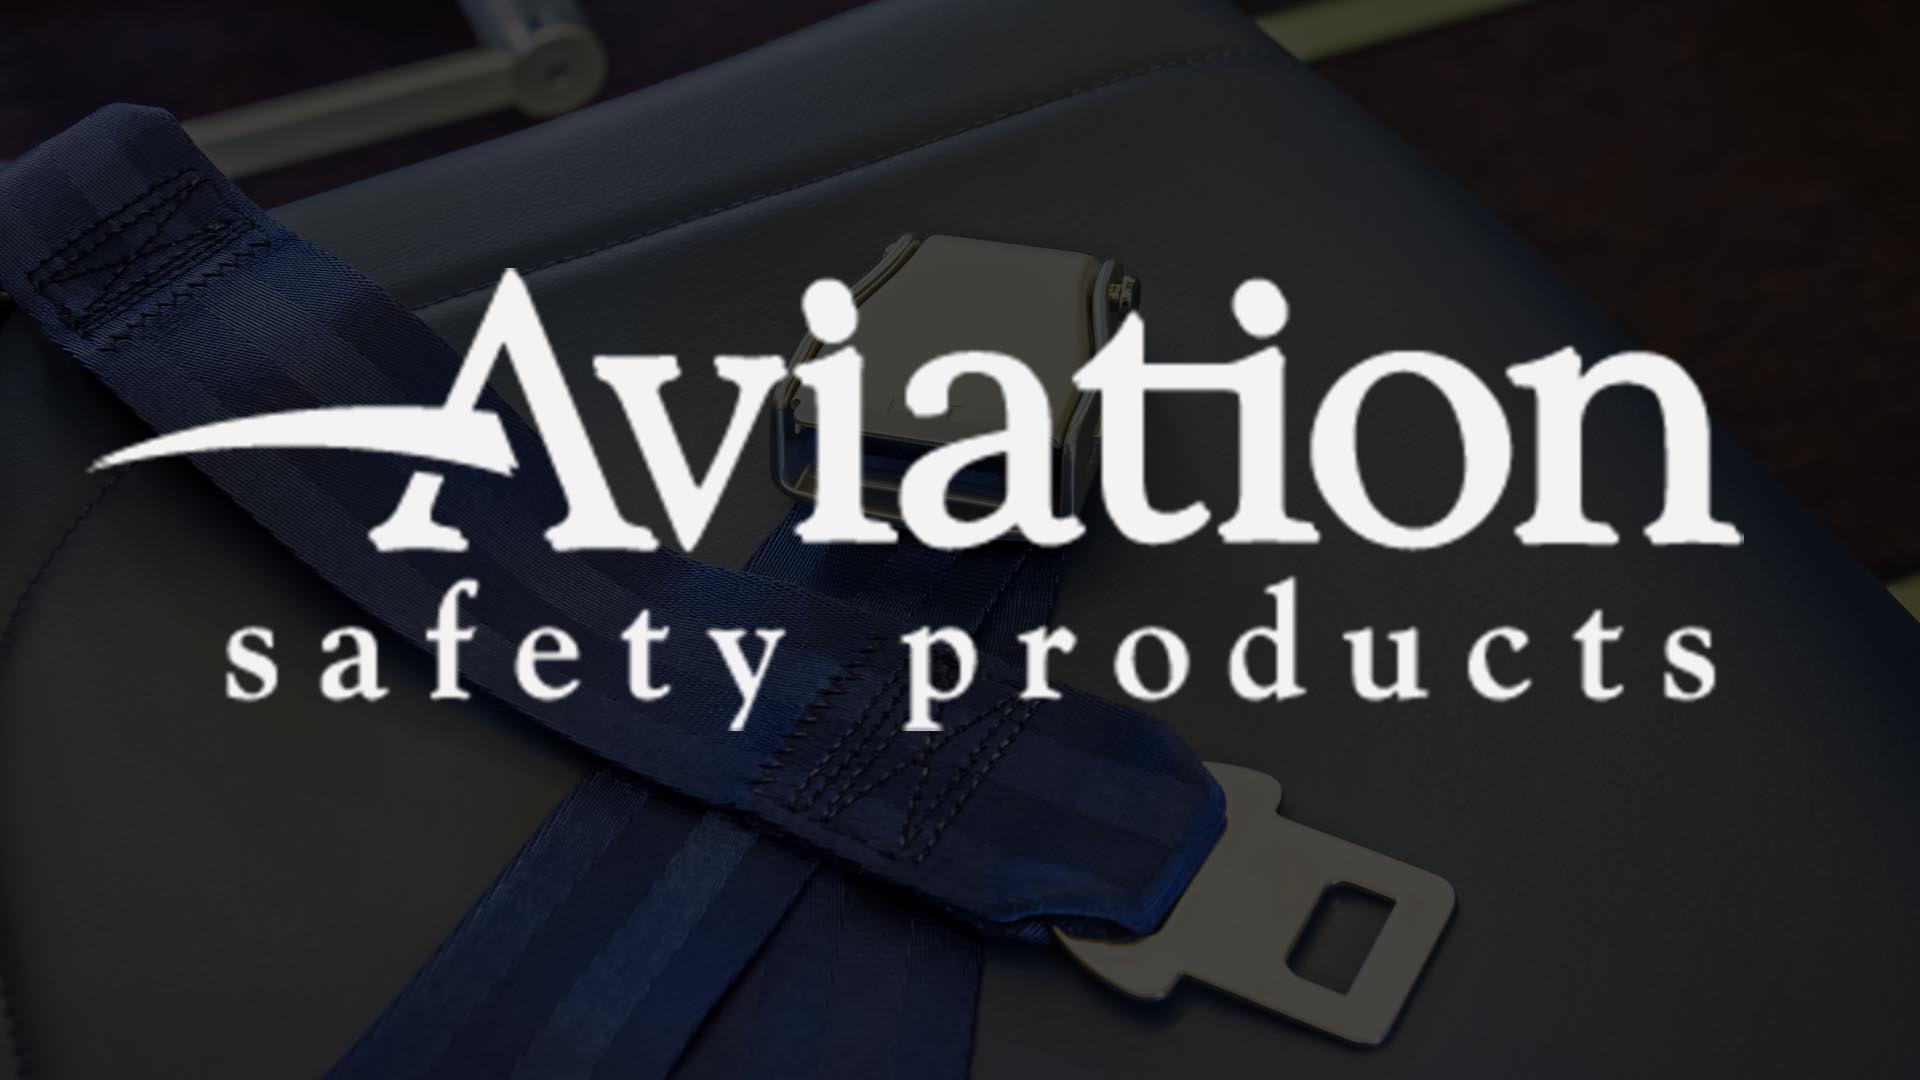 Aviation Safety Products